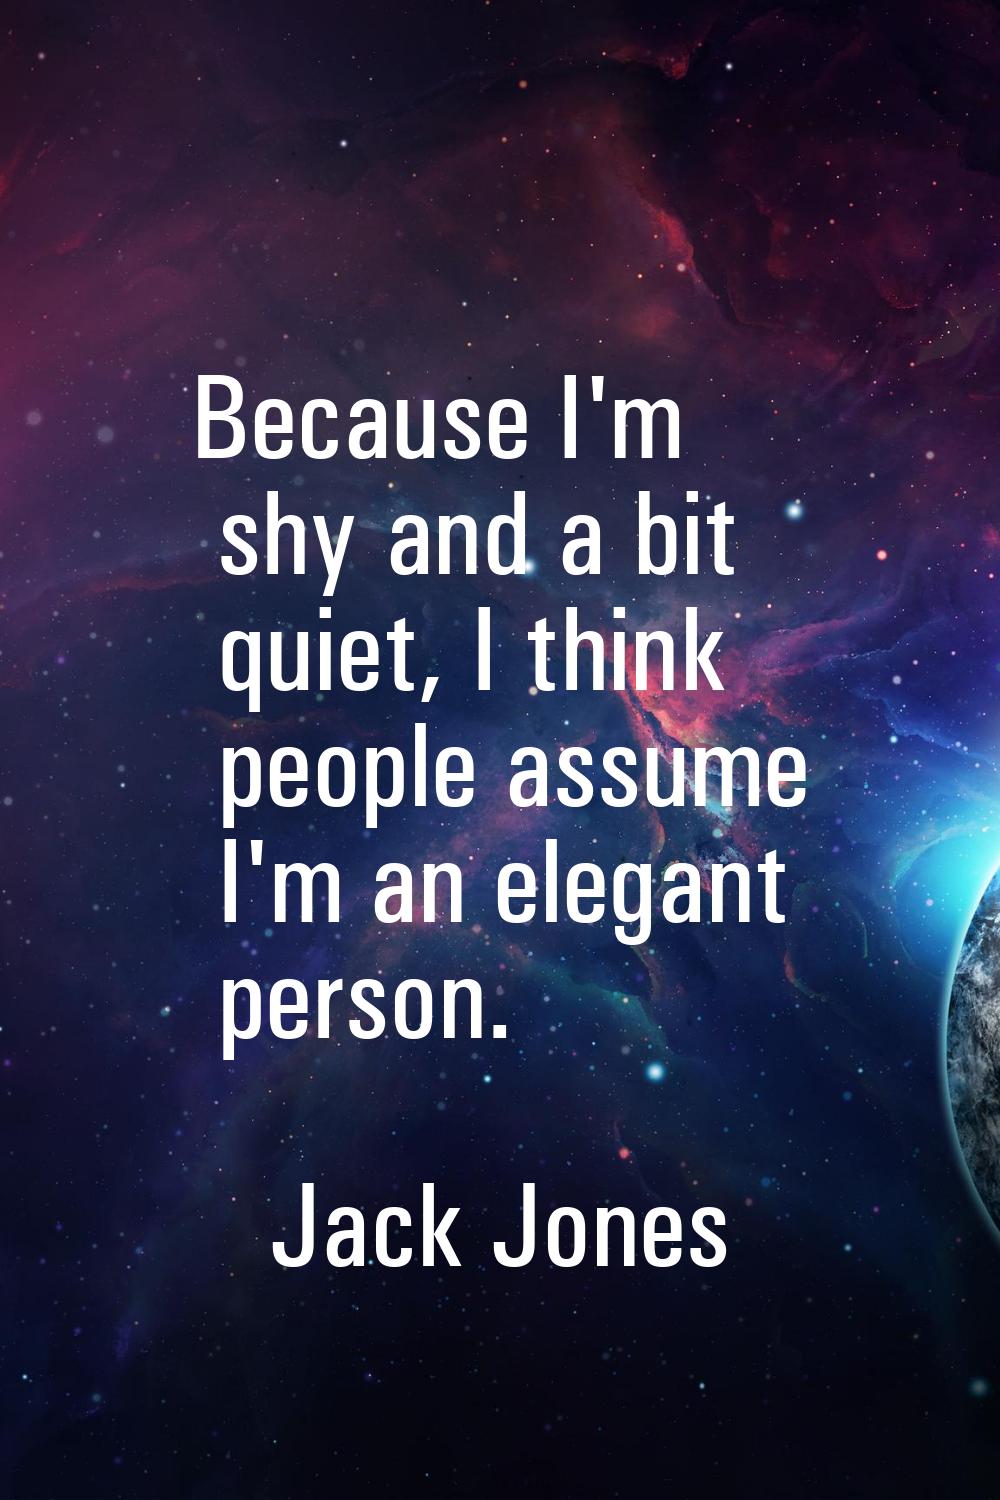 Because I'm shy and a bit quiet, I think people assume I'm an elegant person.